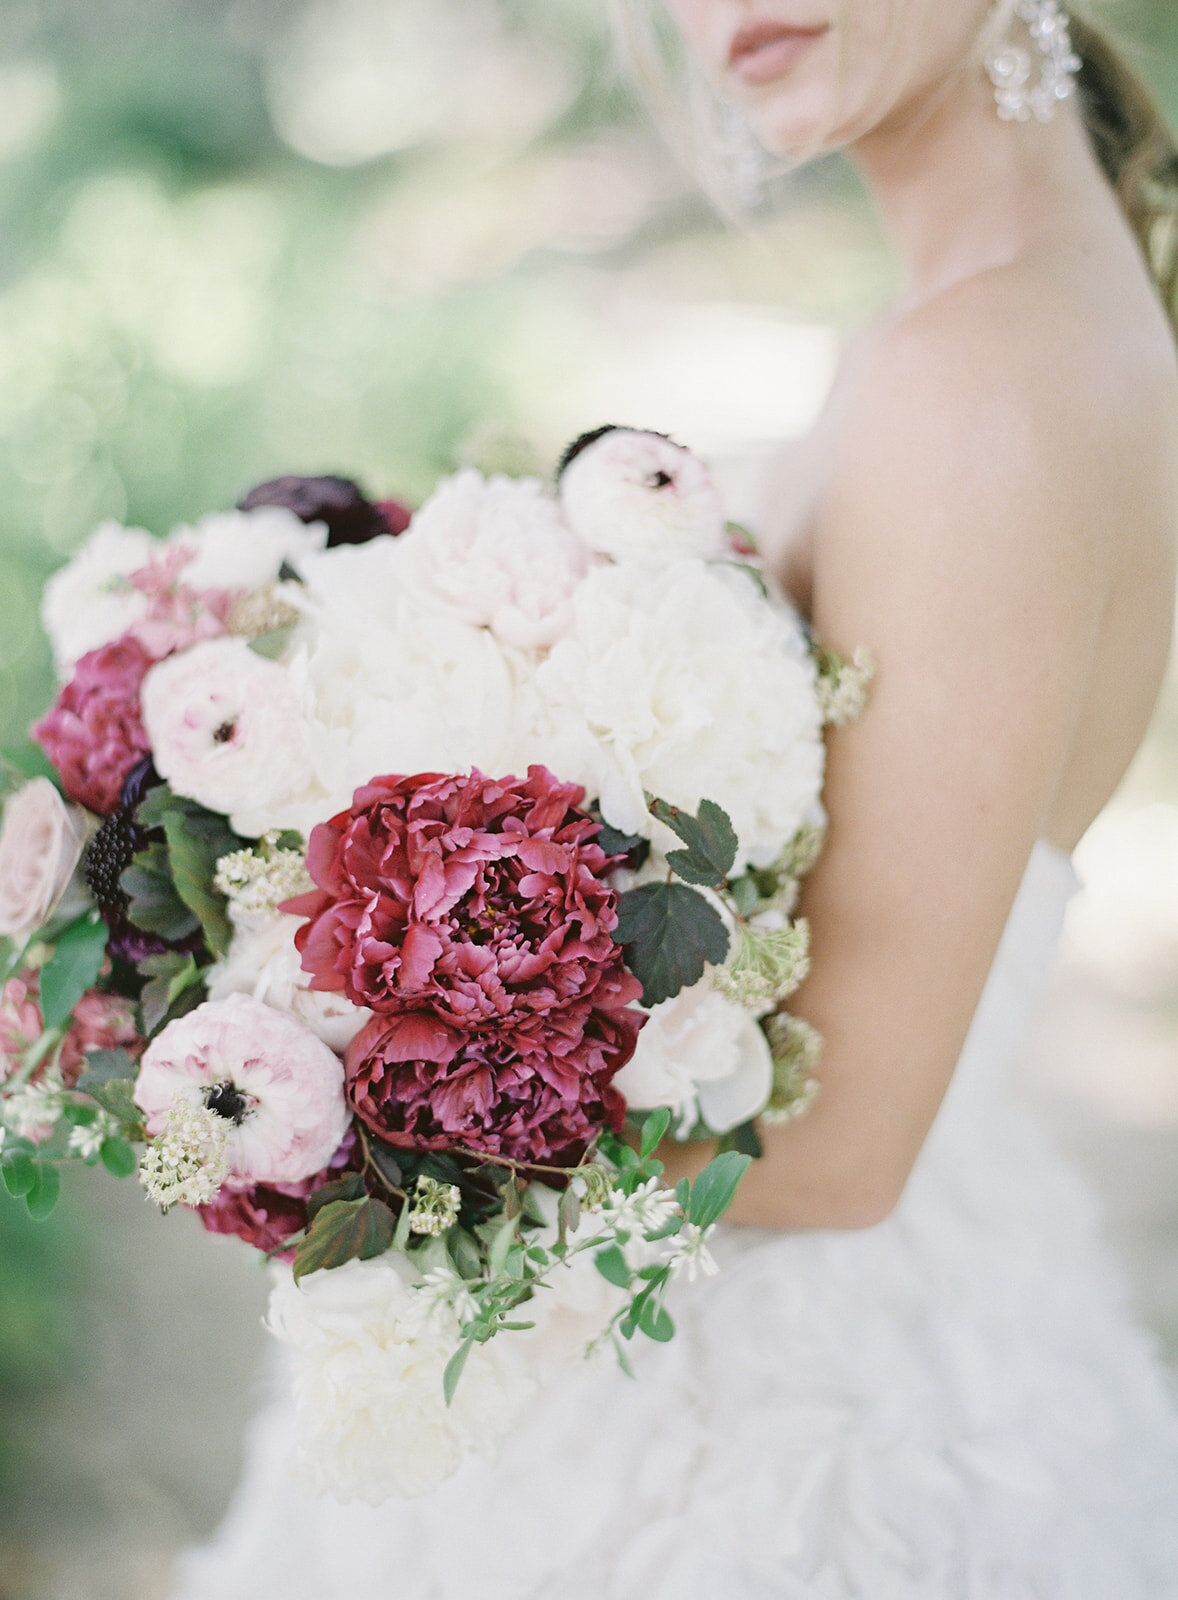 Bride with large floral wedding bouquet in whites, purples and pinks. She is cradling it in her elbow. Photographed by wedding photographers in Charleston Amy Mulder Photography